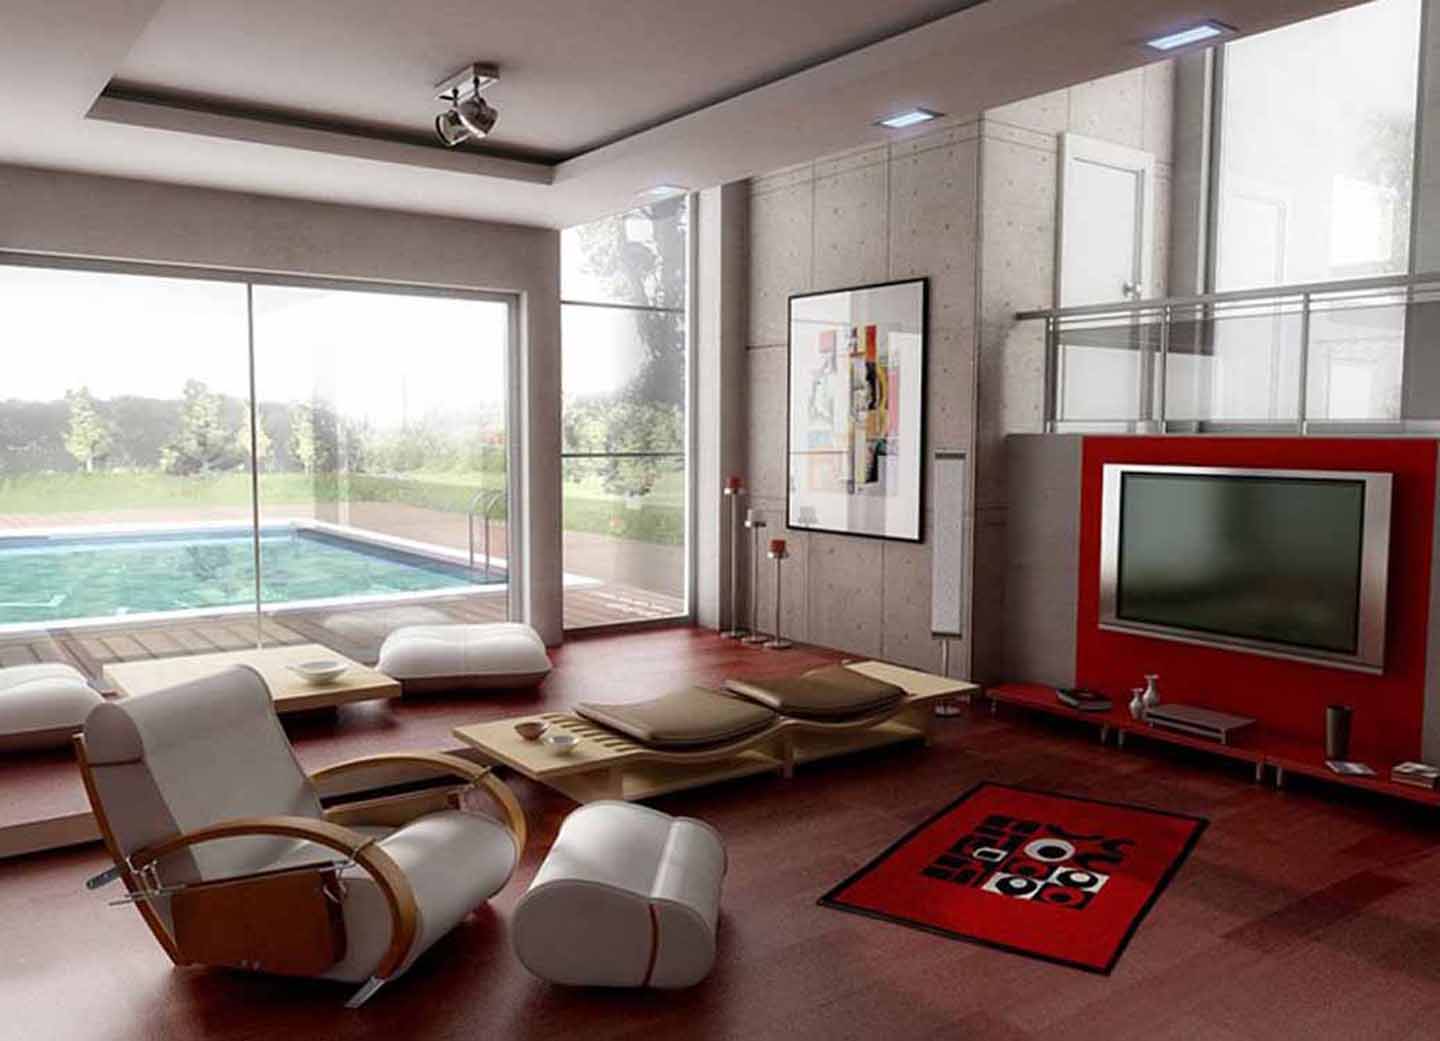 Home Interior Living Awesome Home Interior Design For Living Room Concept With Classy Brown Wooden Floor Ideas With Modern White Sofa Also Large Ceiling Glass Plus Beige Wall Paint Color Ideas Furniture Selecting Beautiful Furniture For Home Interior Design